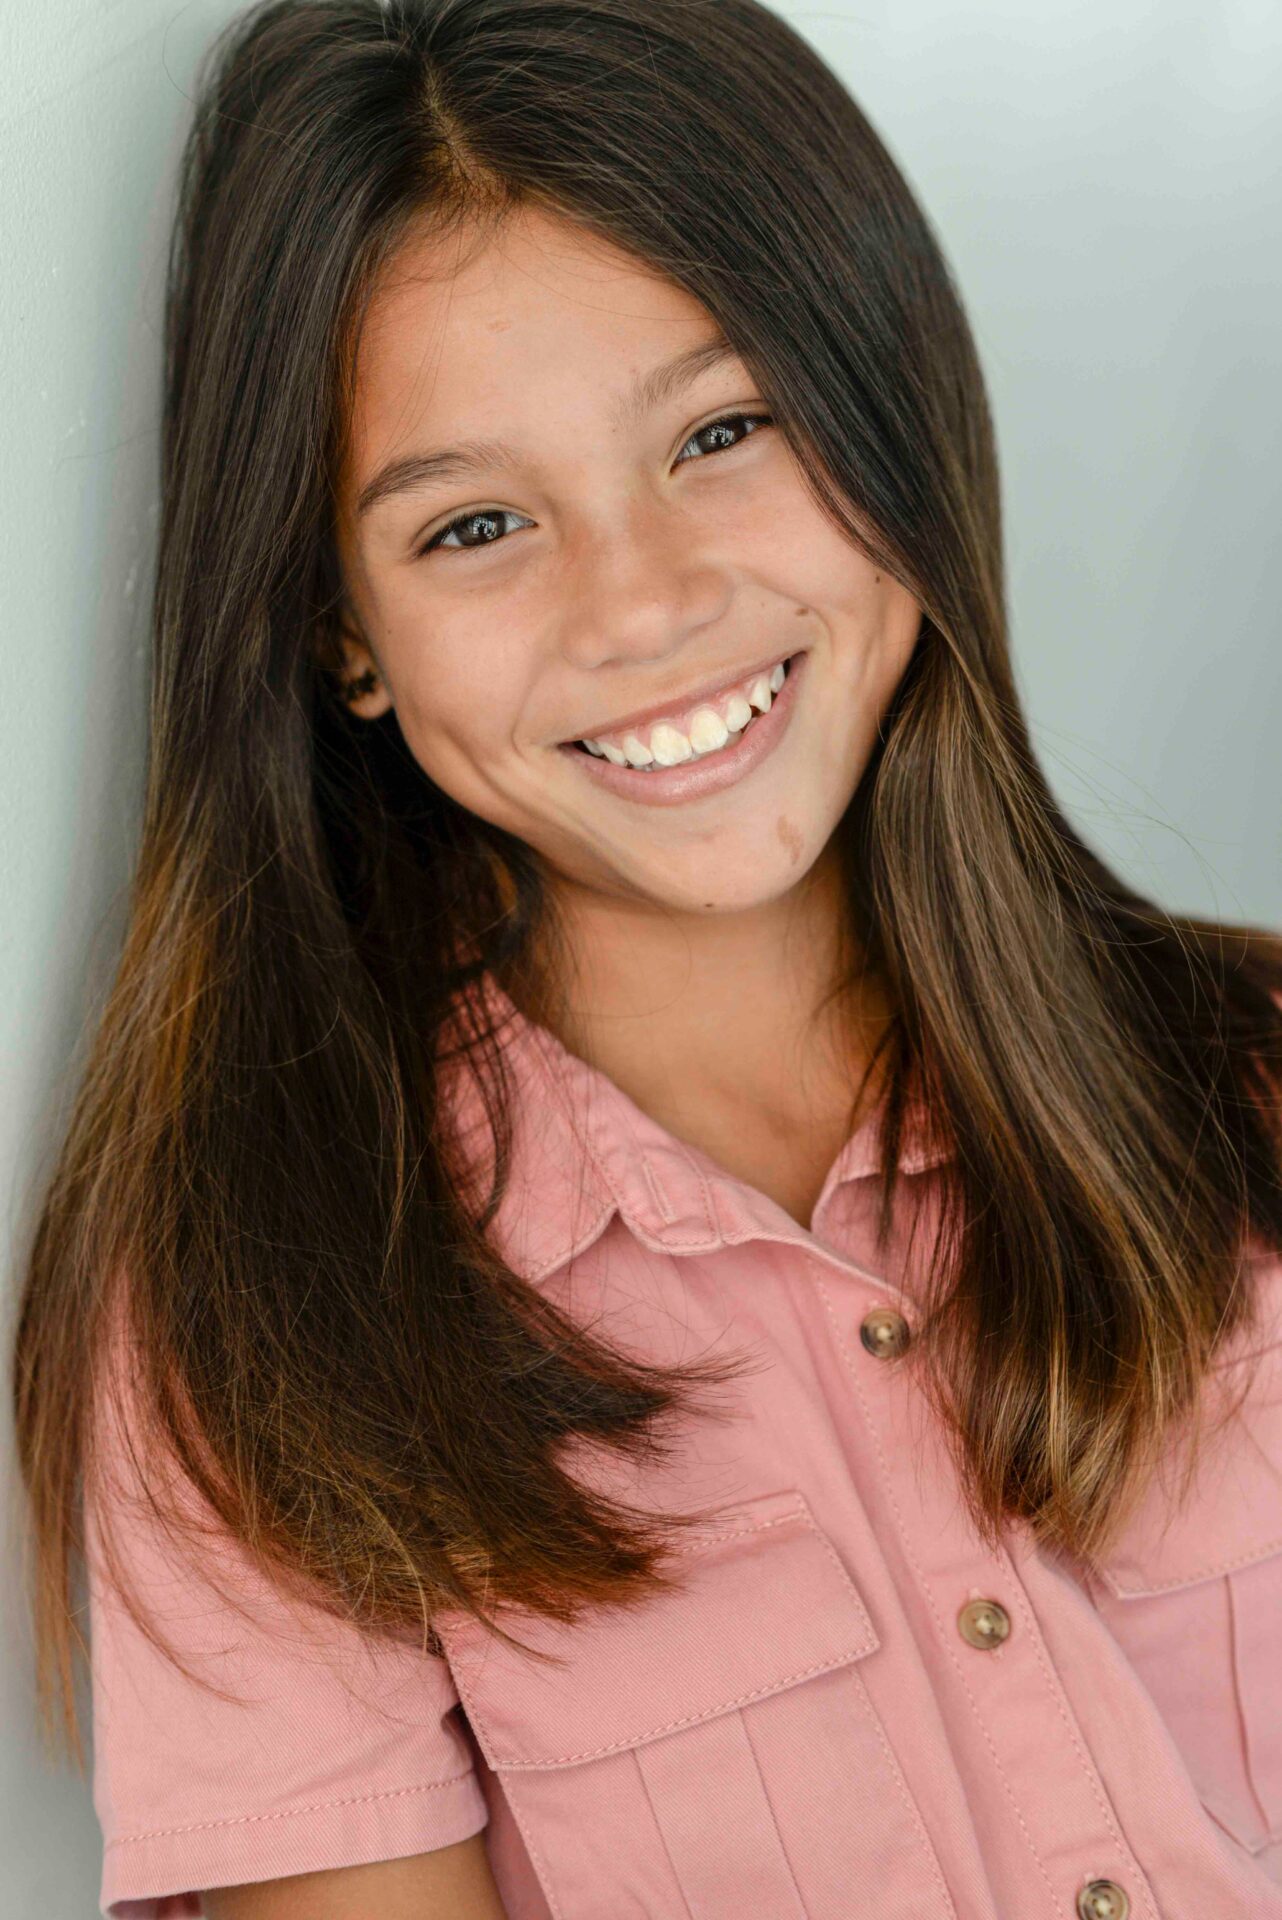 A teen with long hair smiling at the camera